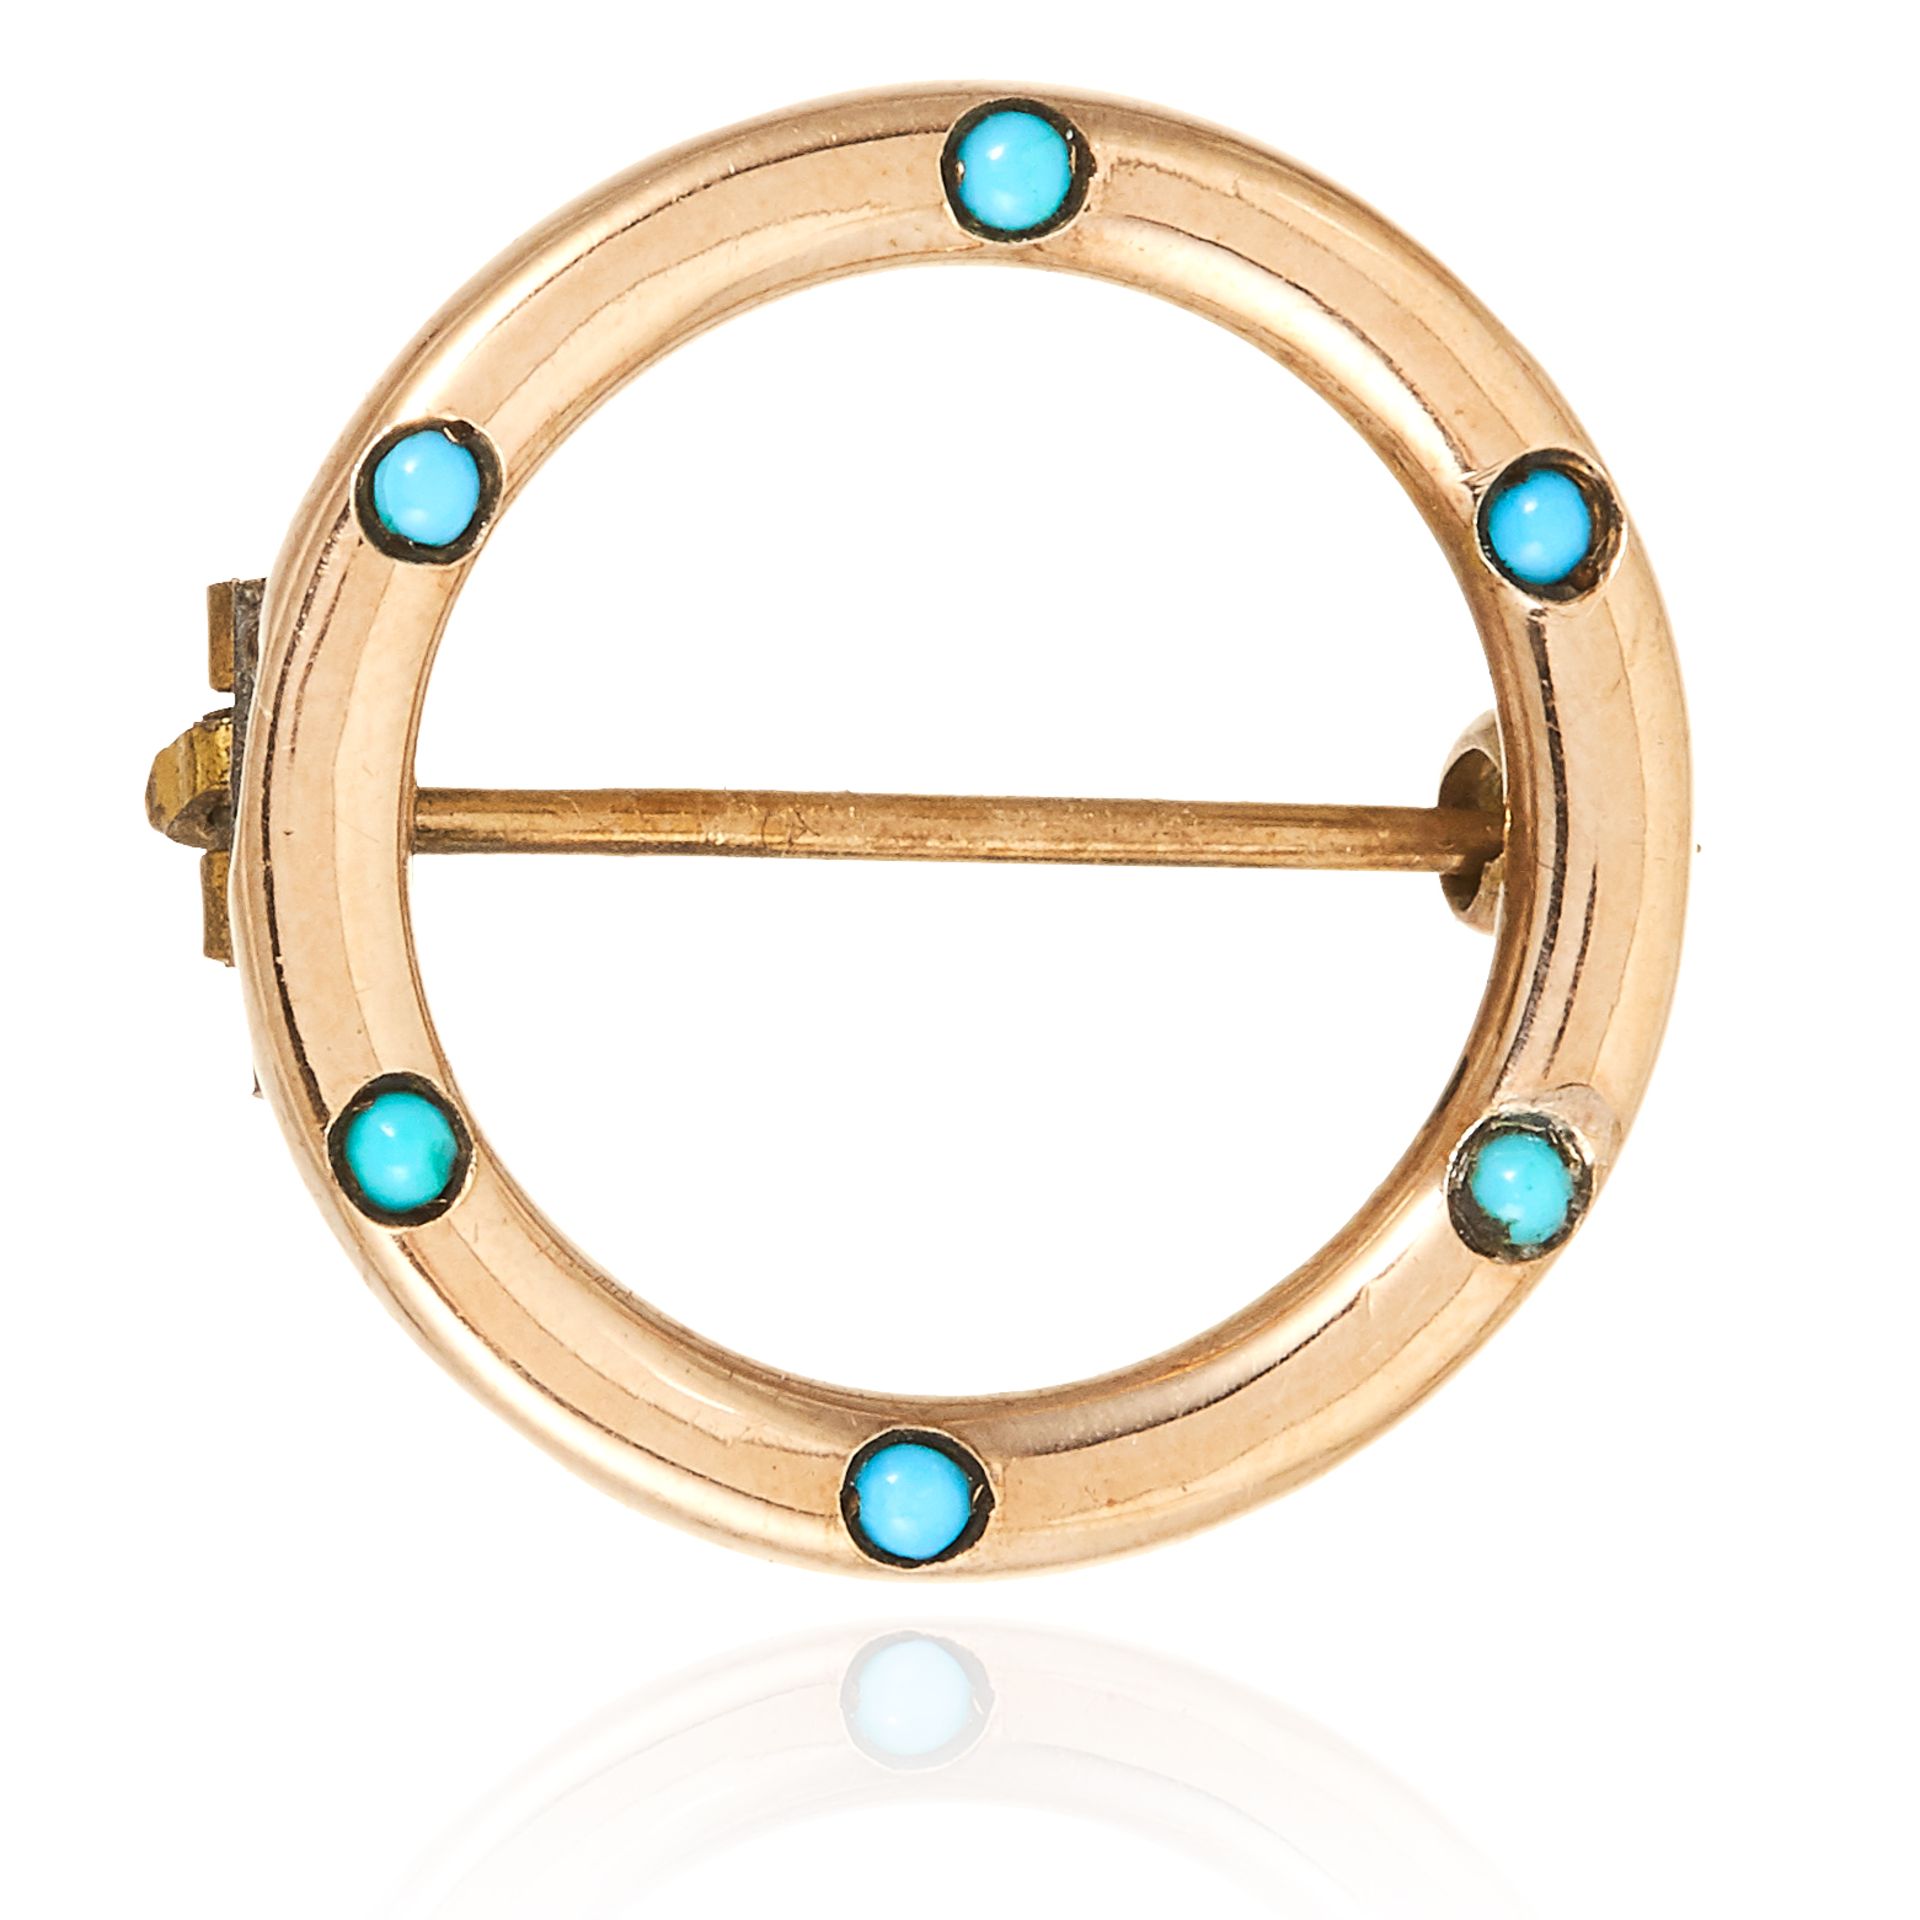 A TURQUOISE BROOCH / PENDANT in 9ct yellow gold, the circular face is jewelled with six turquoise